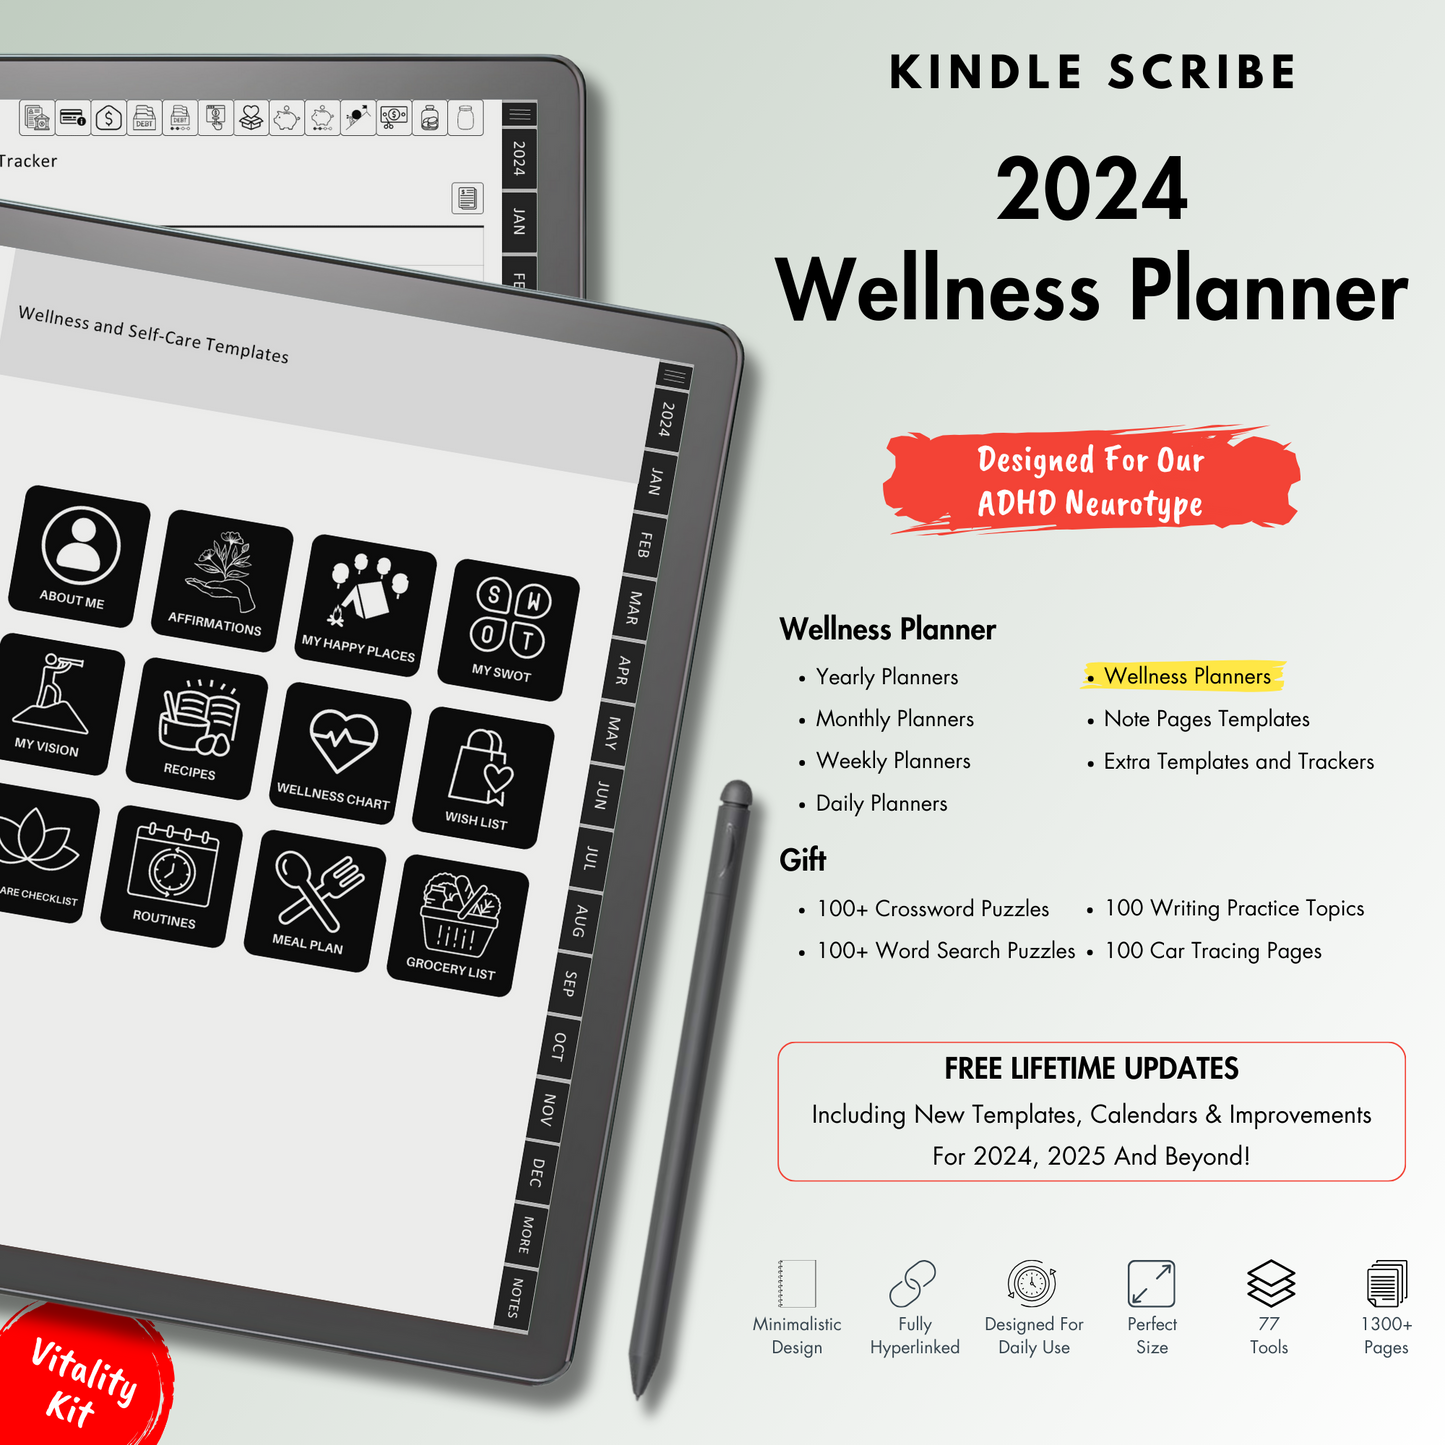 Wellness Planner 2024 for Kindle Scribe.